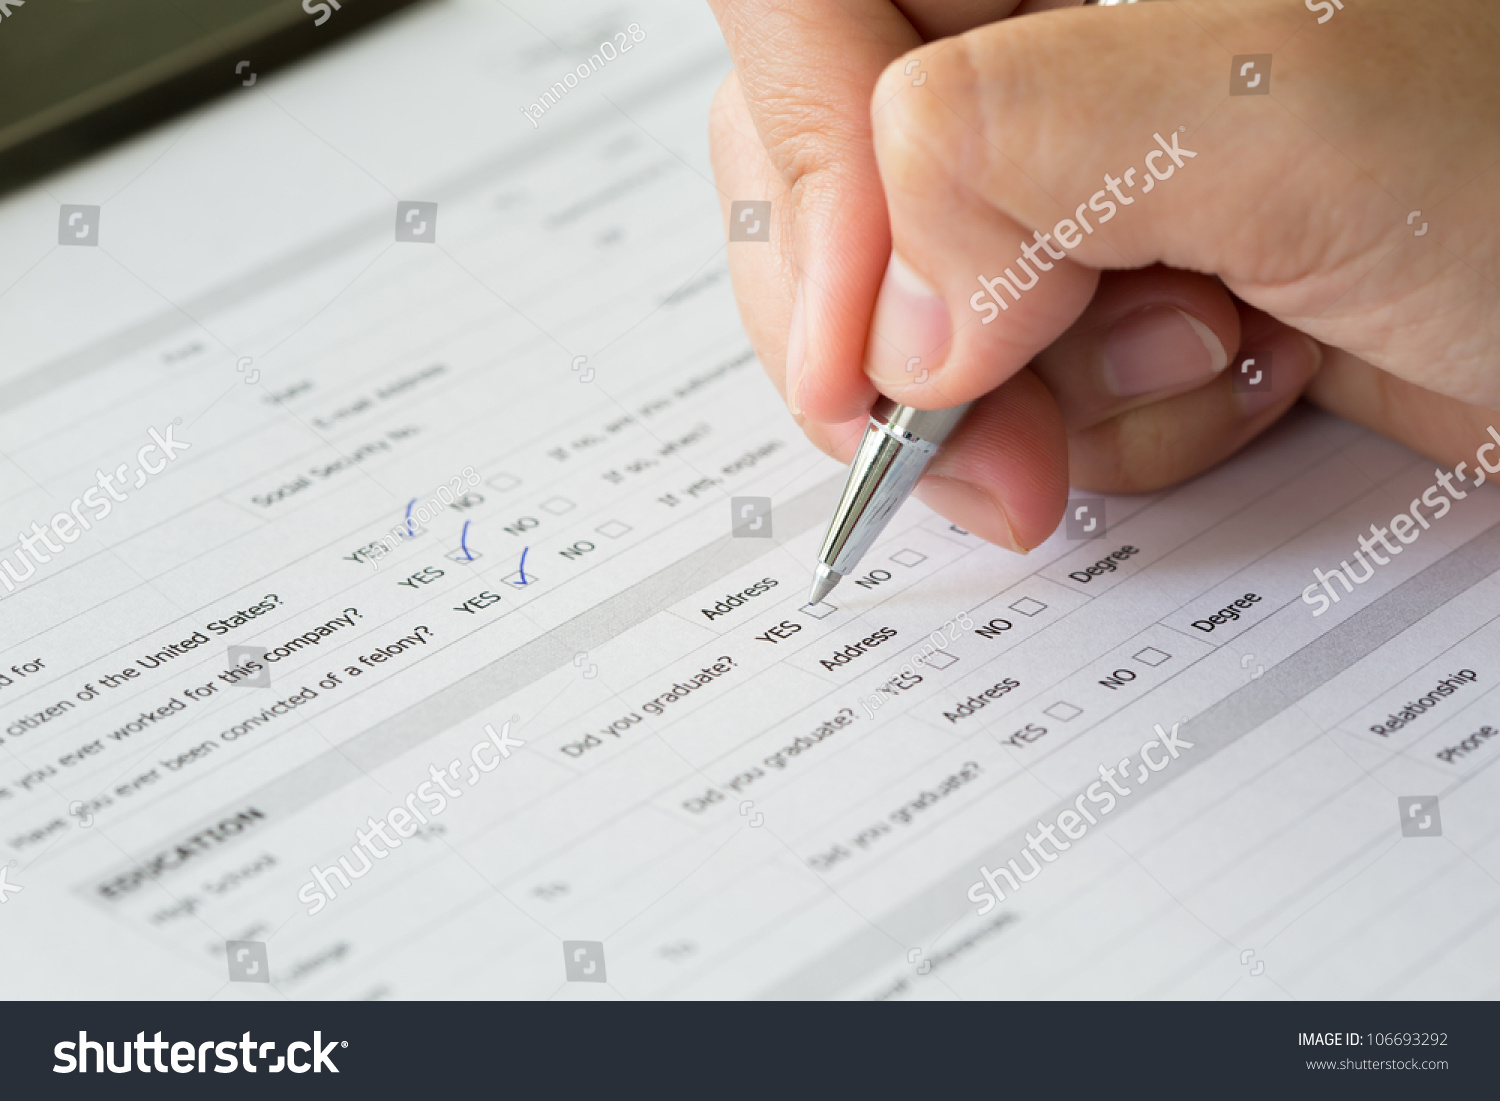 Hand with pen over blank check boxes in application form #106693292